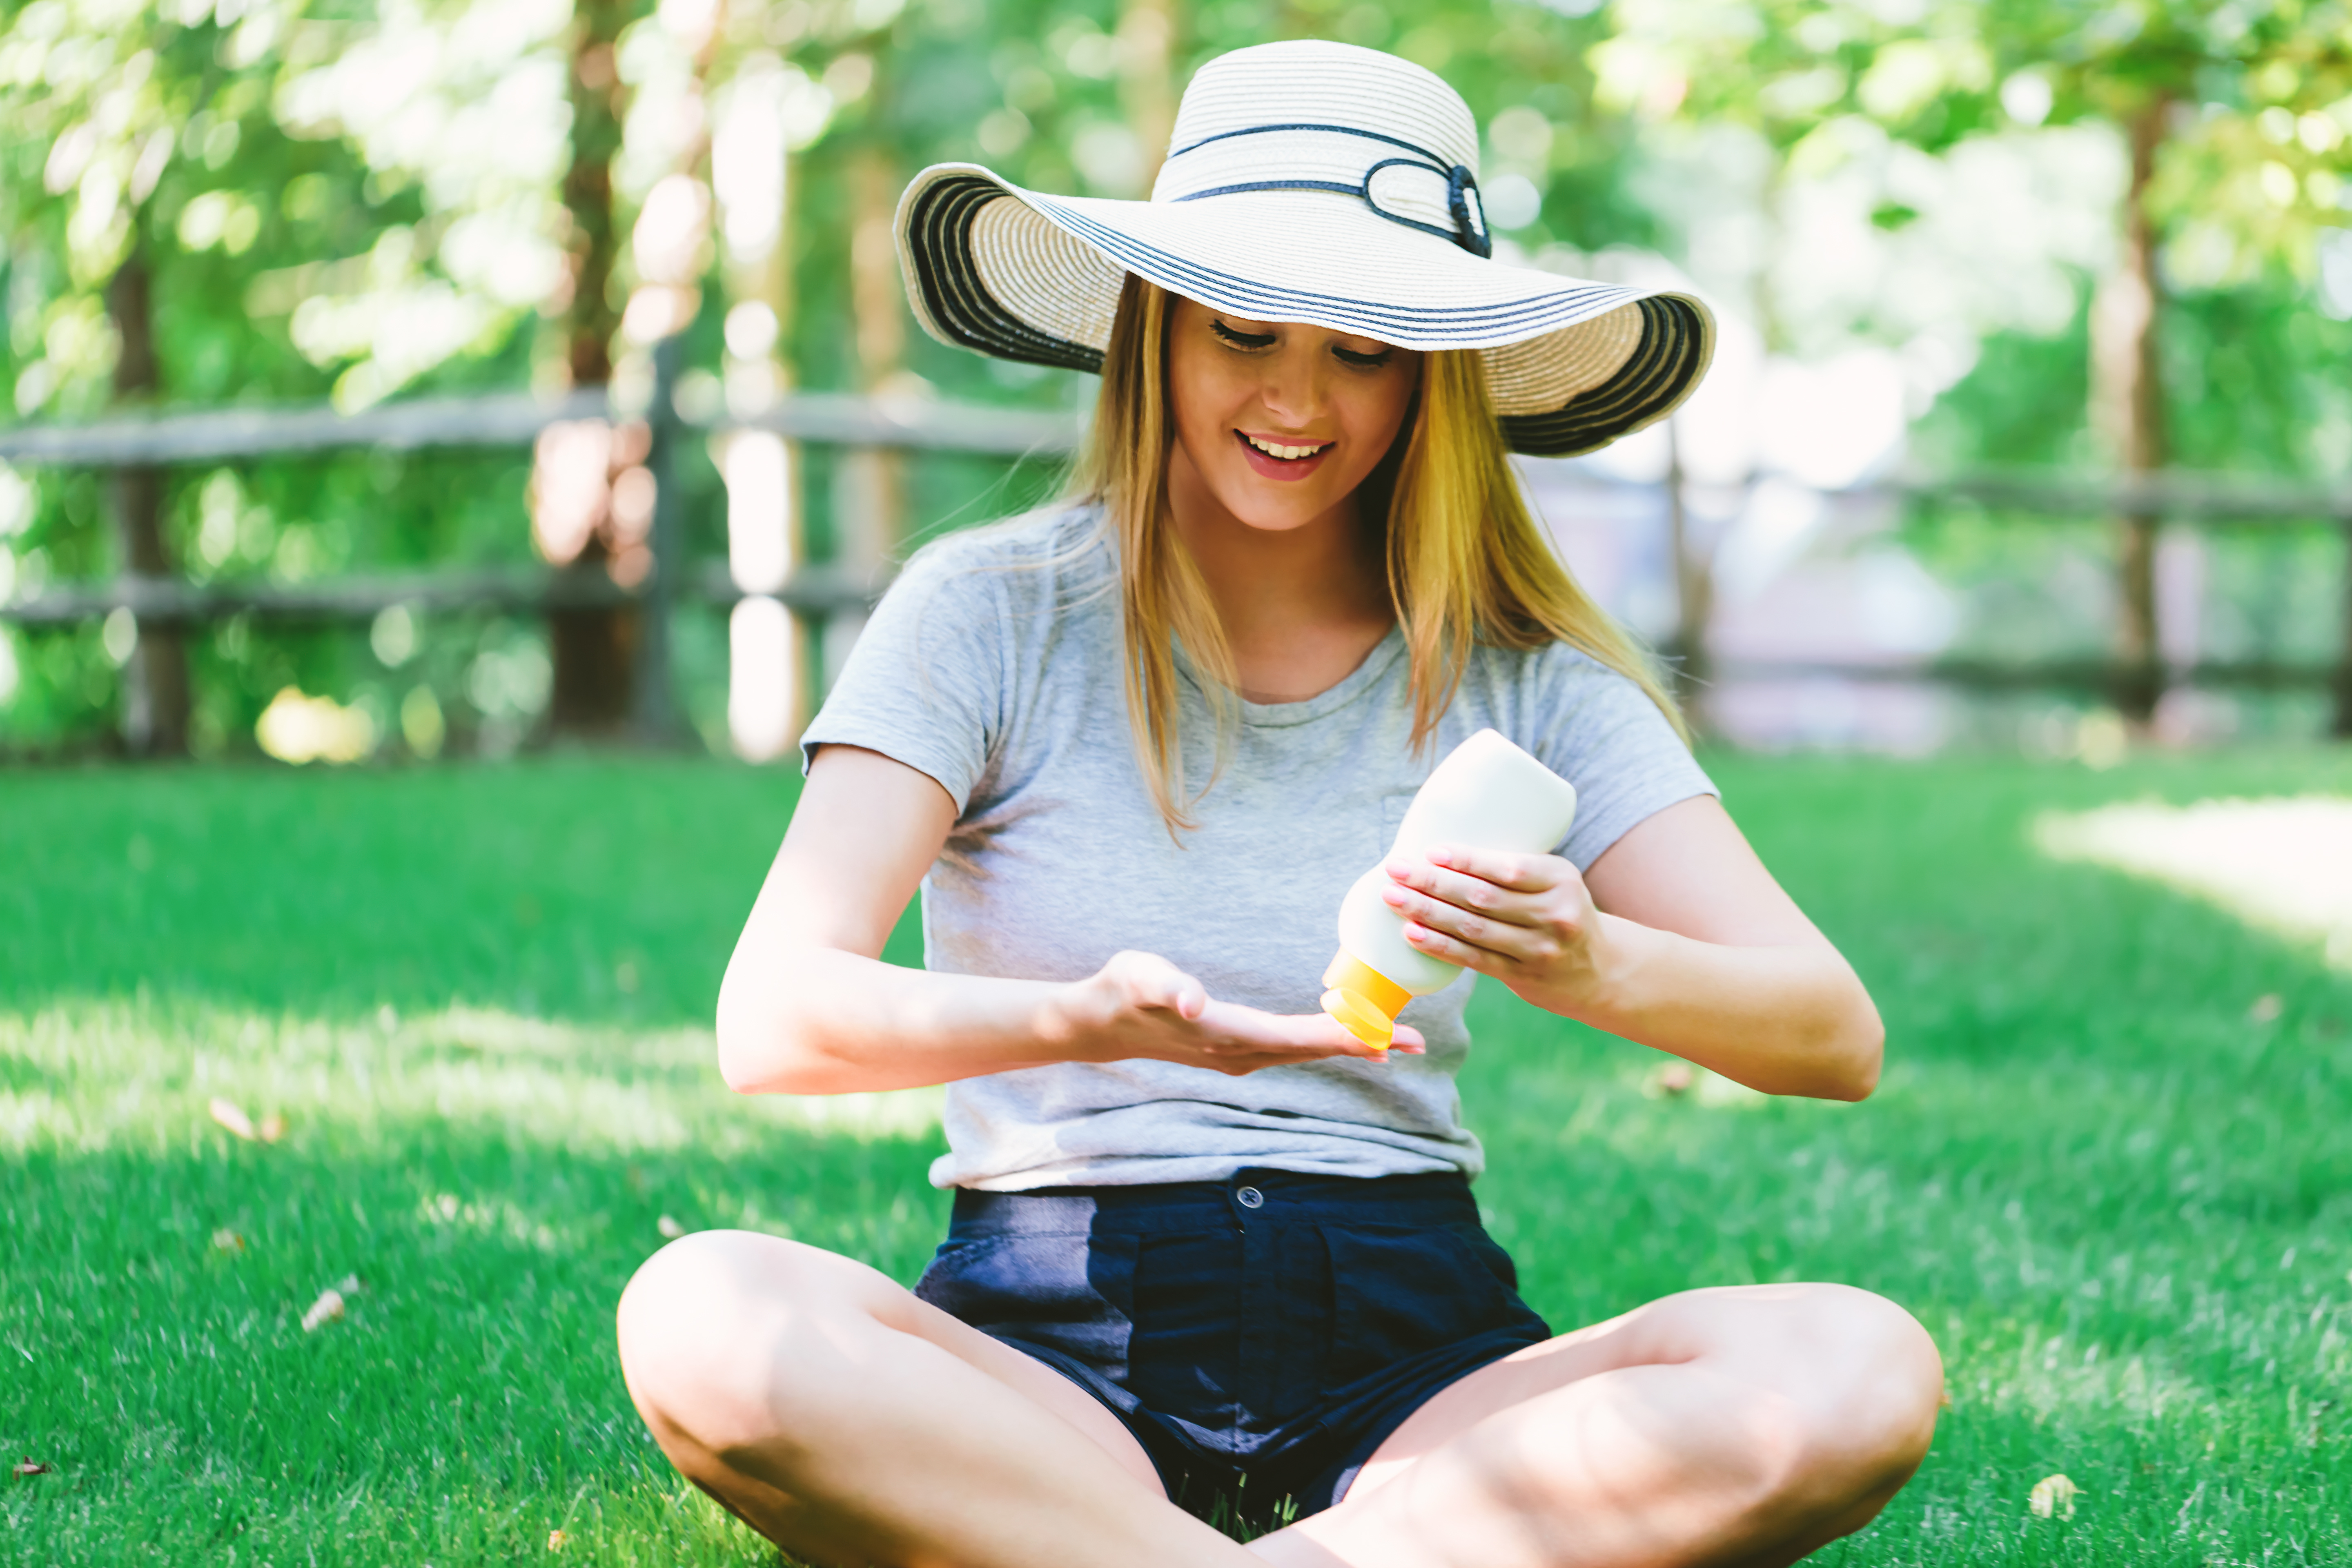 a young woman applies sunscreen while wearing a large hat